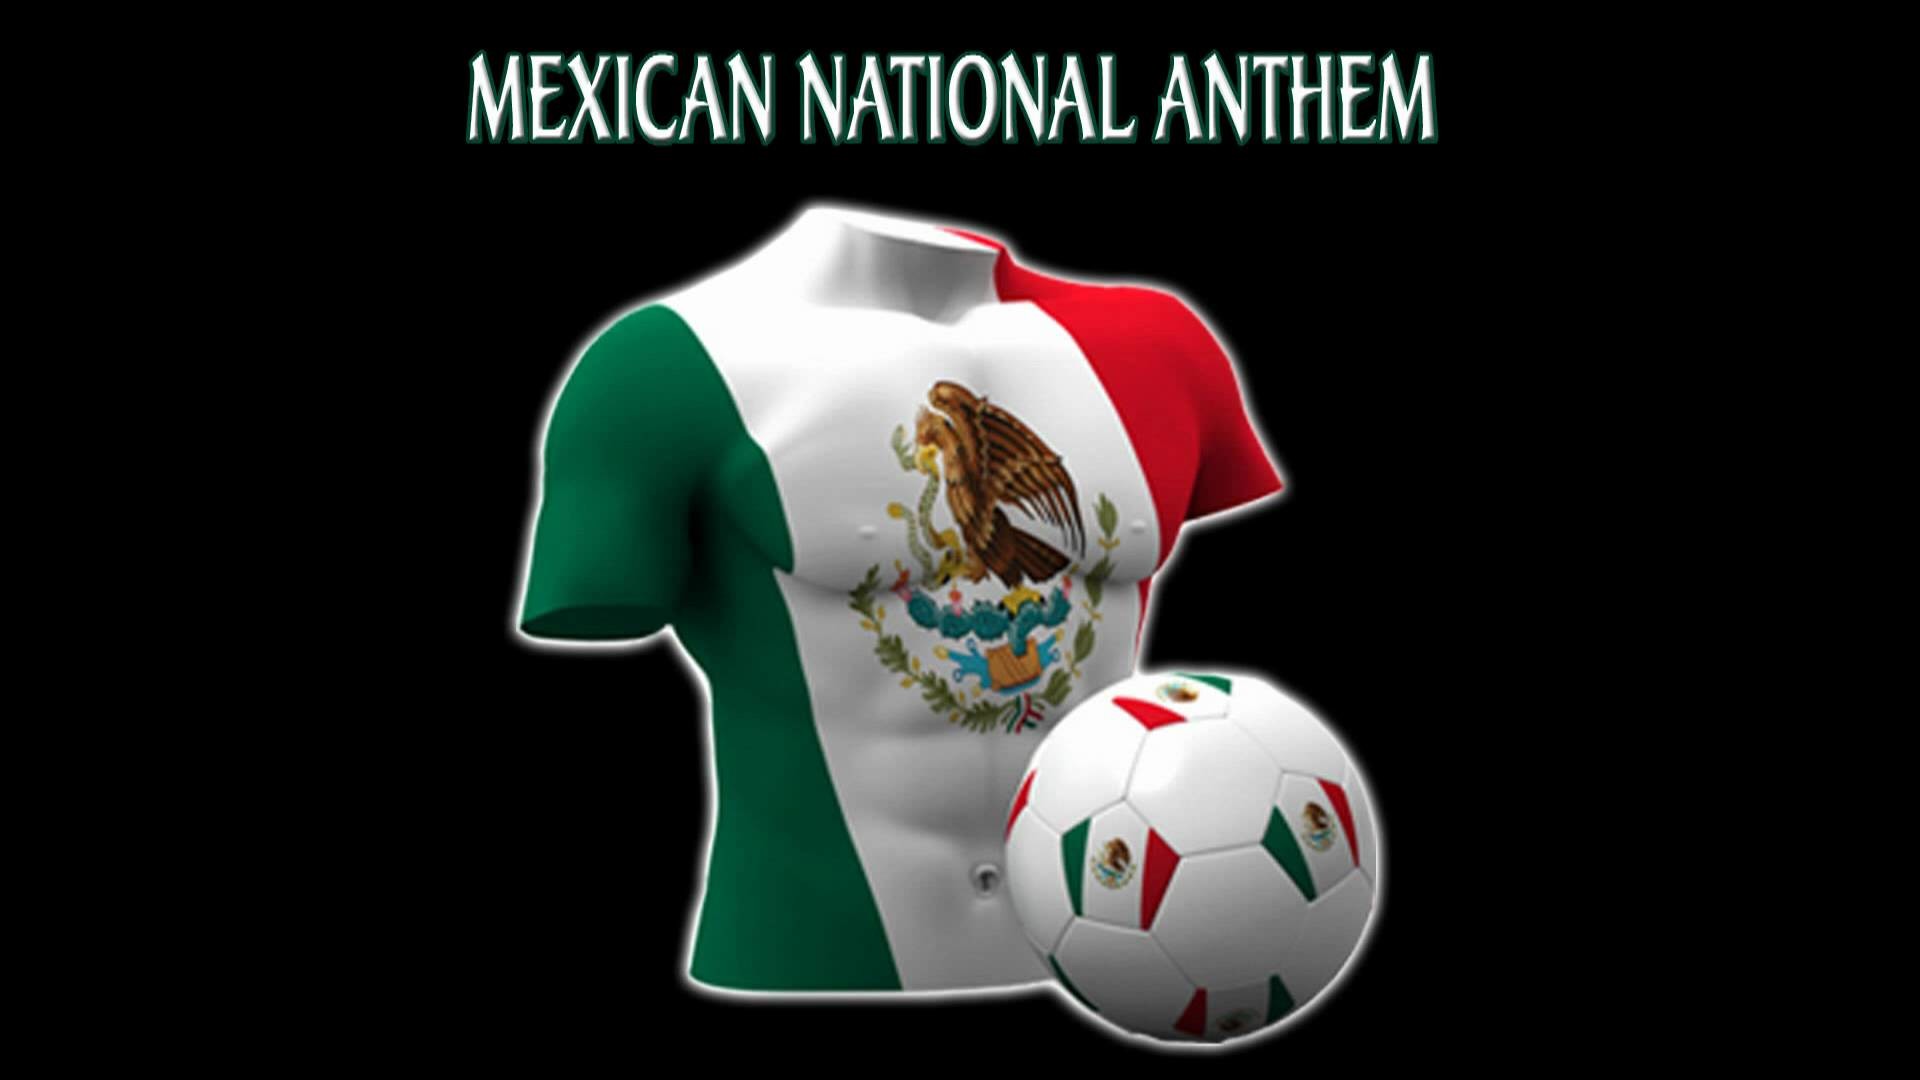 1920x1080 Mexican National Anthem Mexico World Cup 2010 South Africa Soccer Football